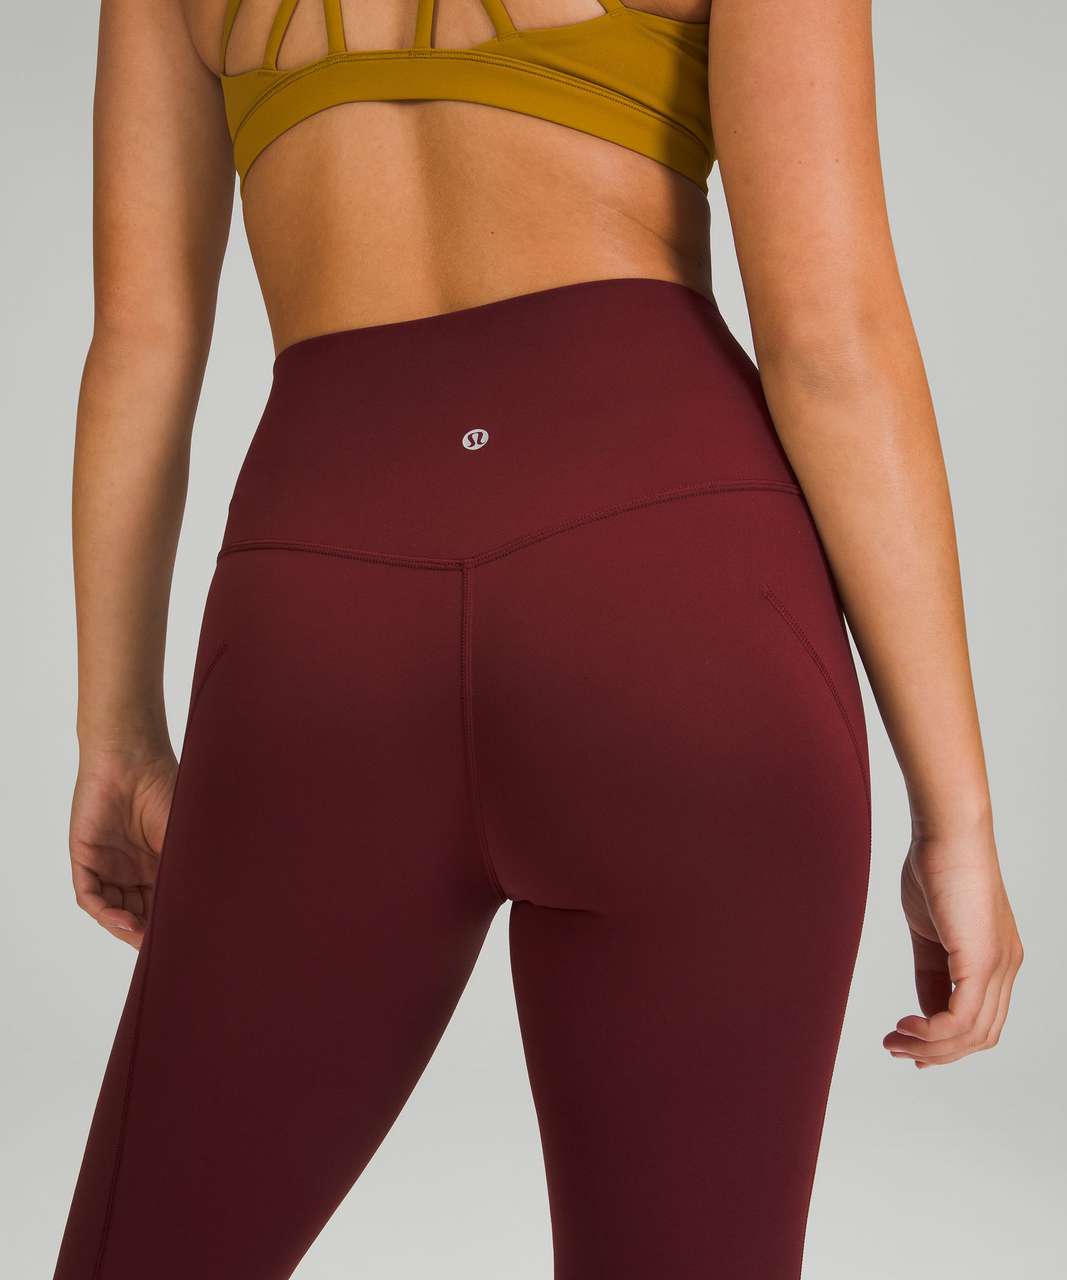 YogaSix - New lululemon]] just dropped! 🤩 This Red Merlot color is perfect  for the holiday season! ⭐️ Align High Waisted Legging by lululemon]] ⭐️  Flow Y Nulu Bra by lululemon]] ⭐️